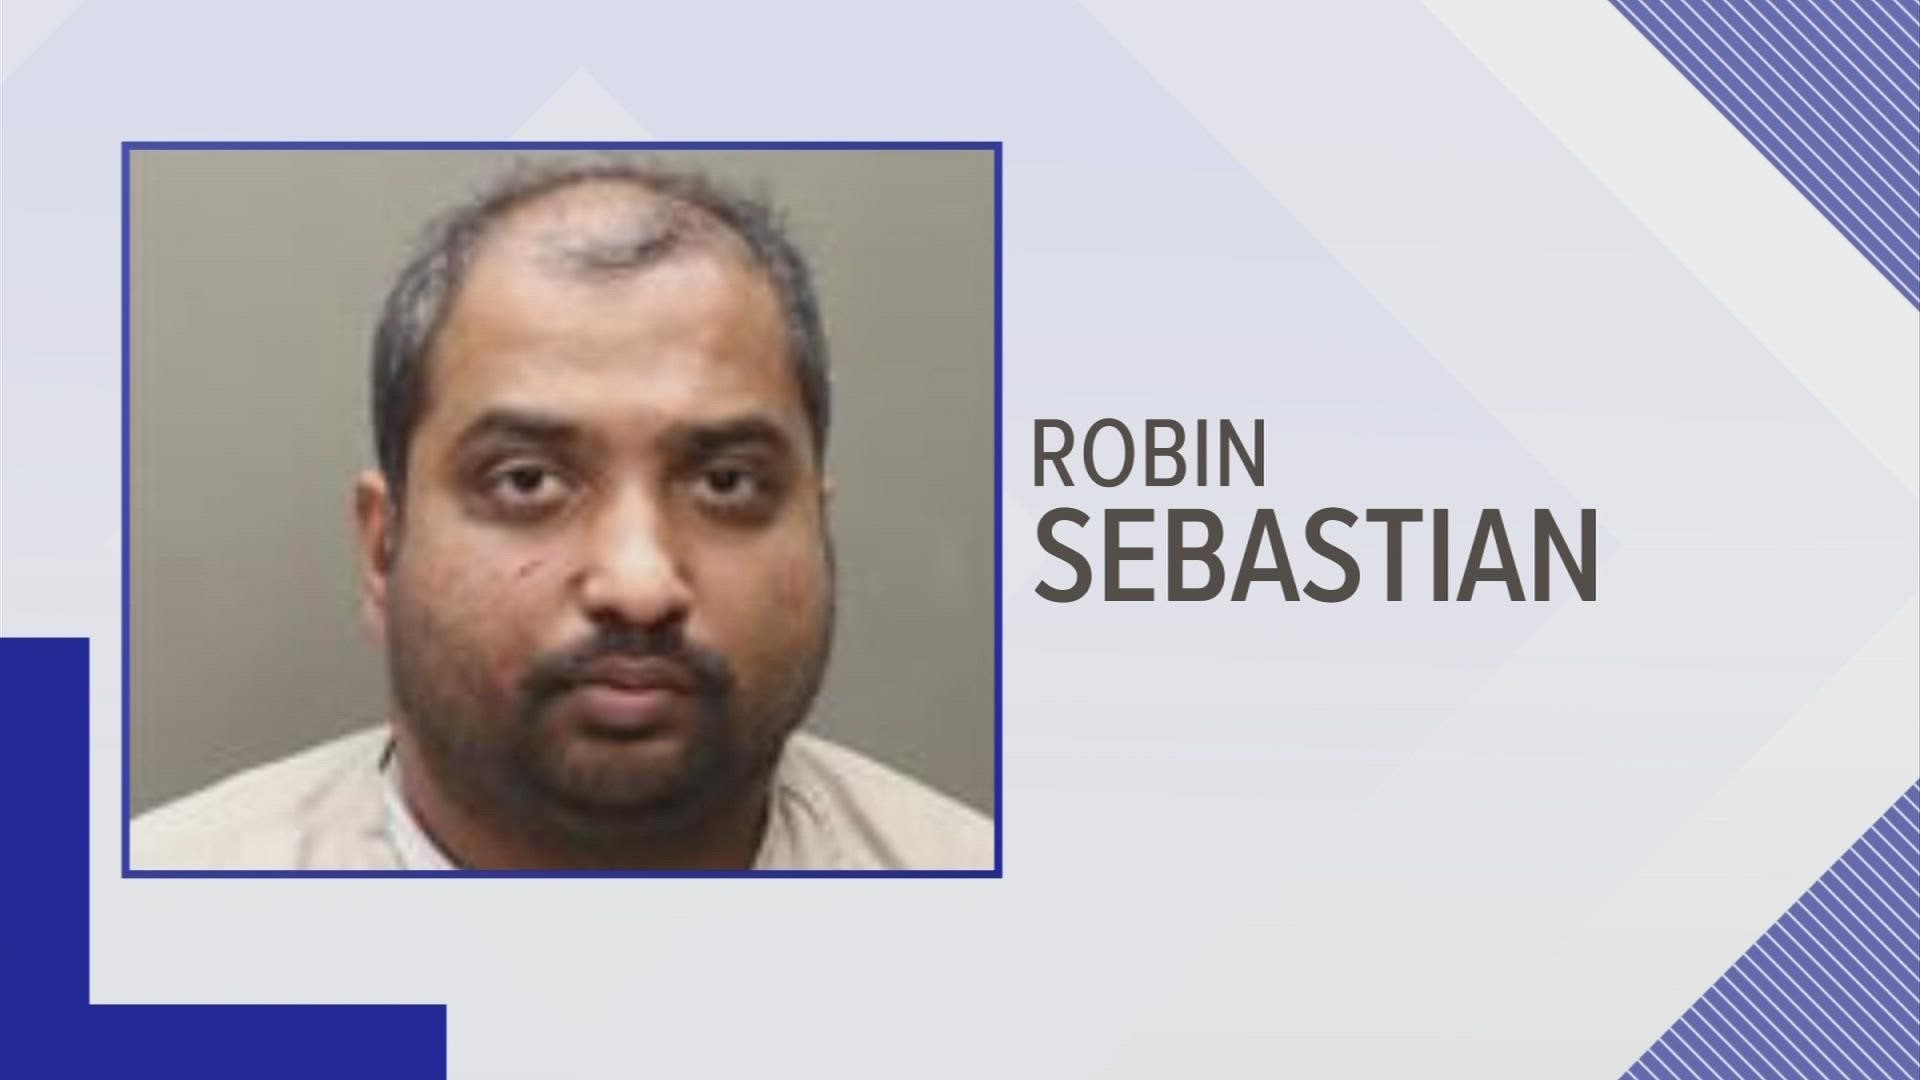 According to police, Robin Sebastian fatally stabbed Pradeep Anand during an argument.